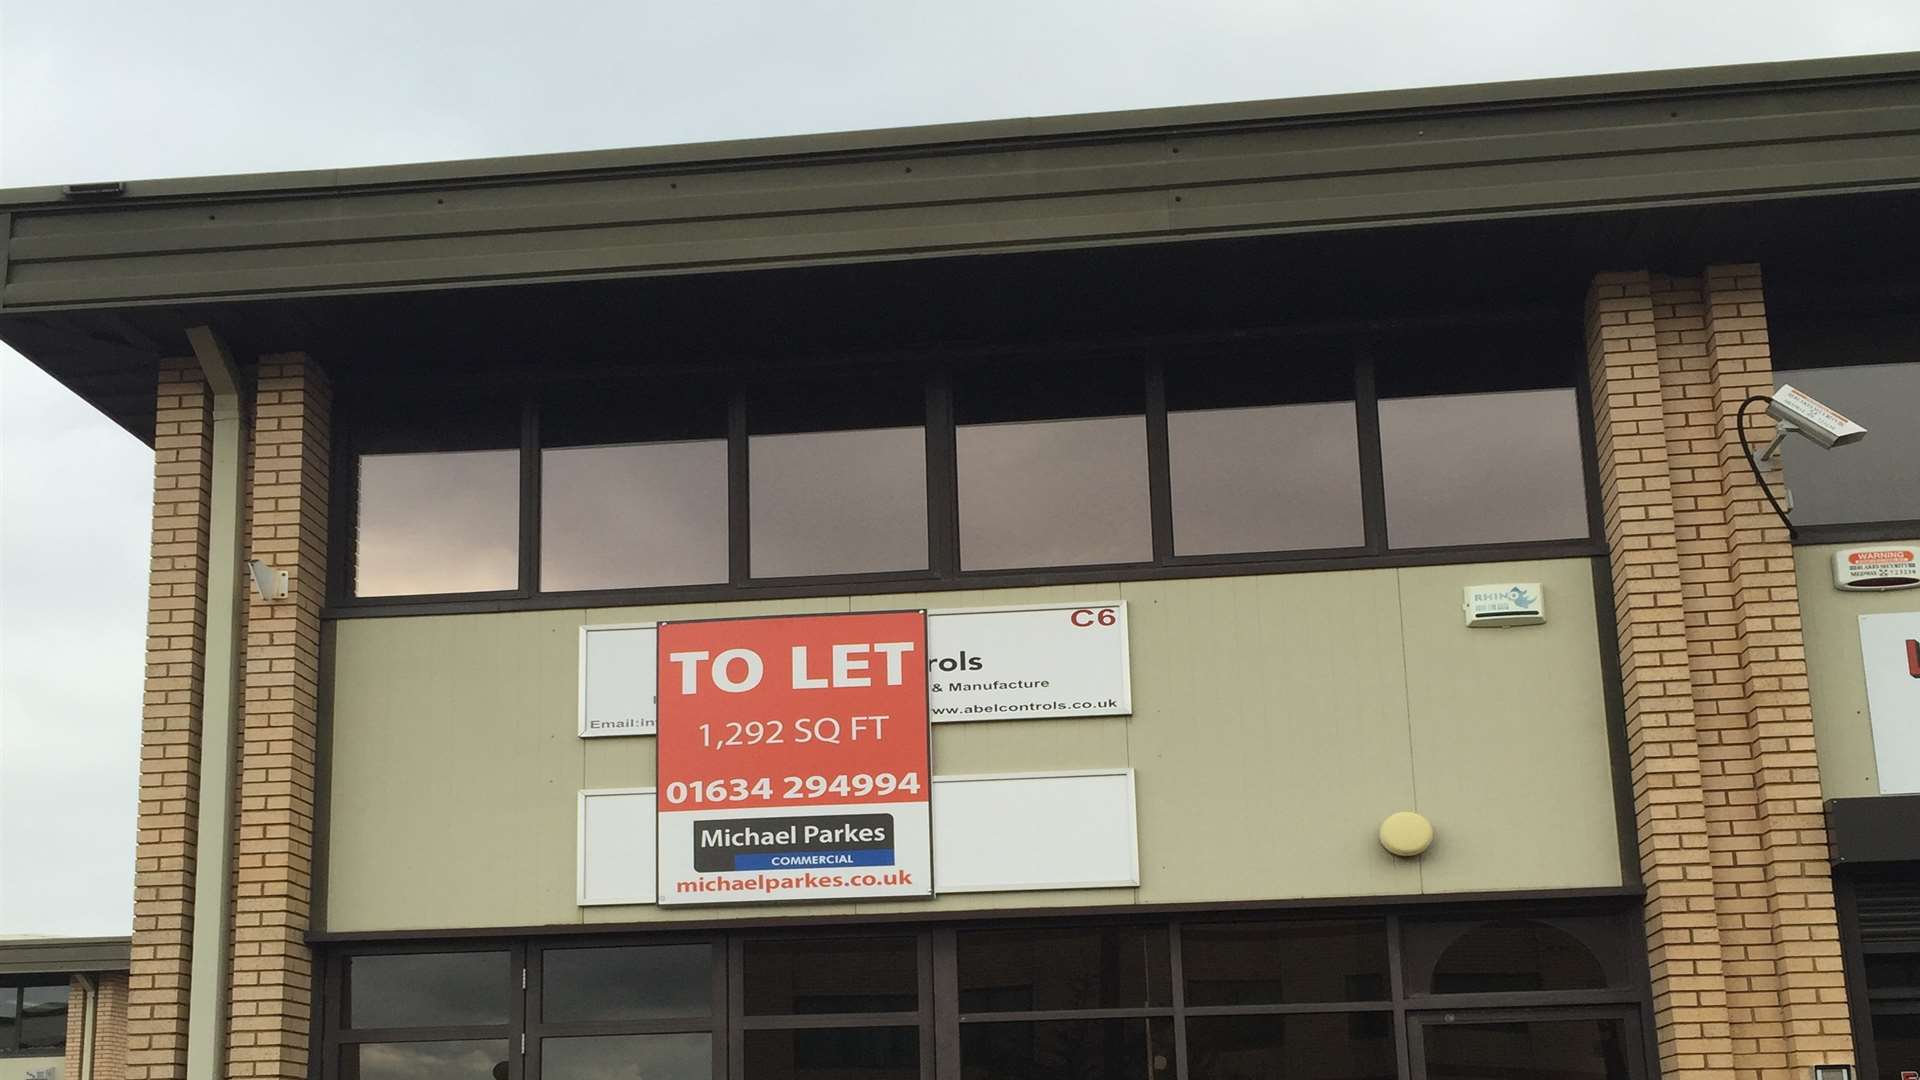 With your commercial property, specialist help will be invaluable in securing the right deal for you.